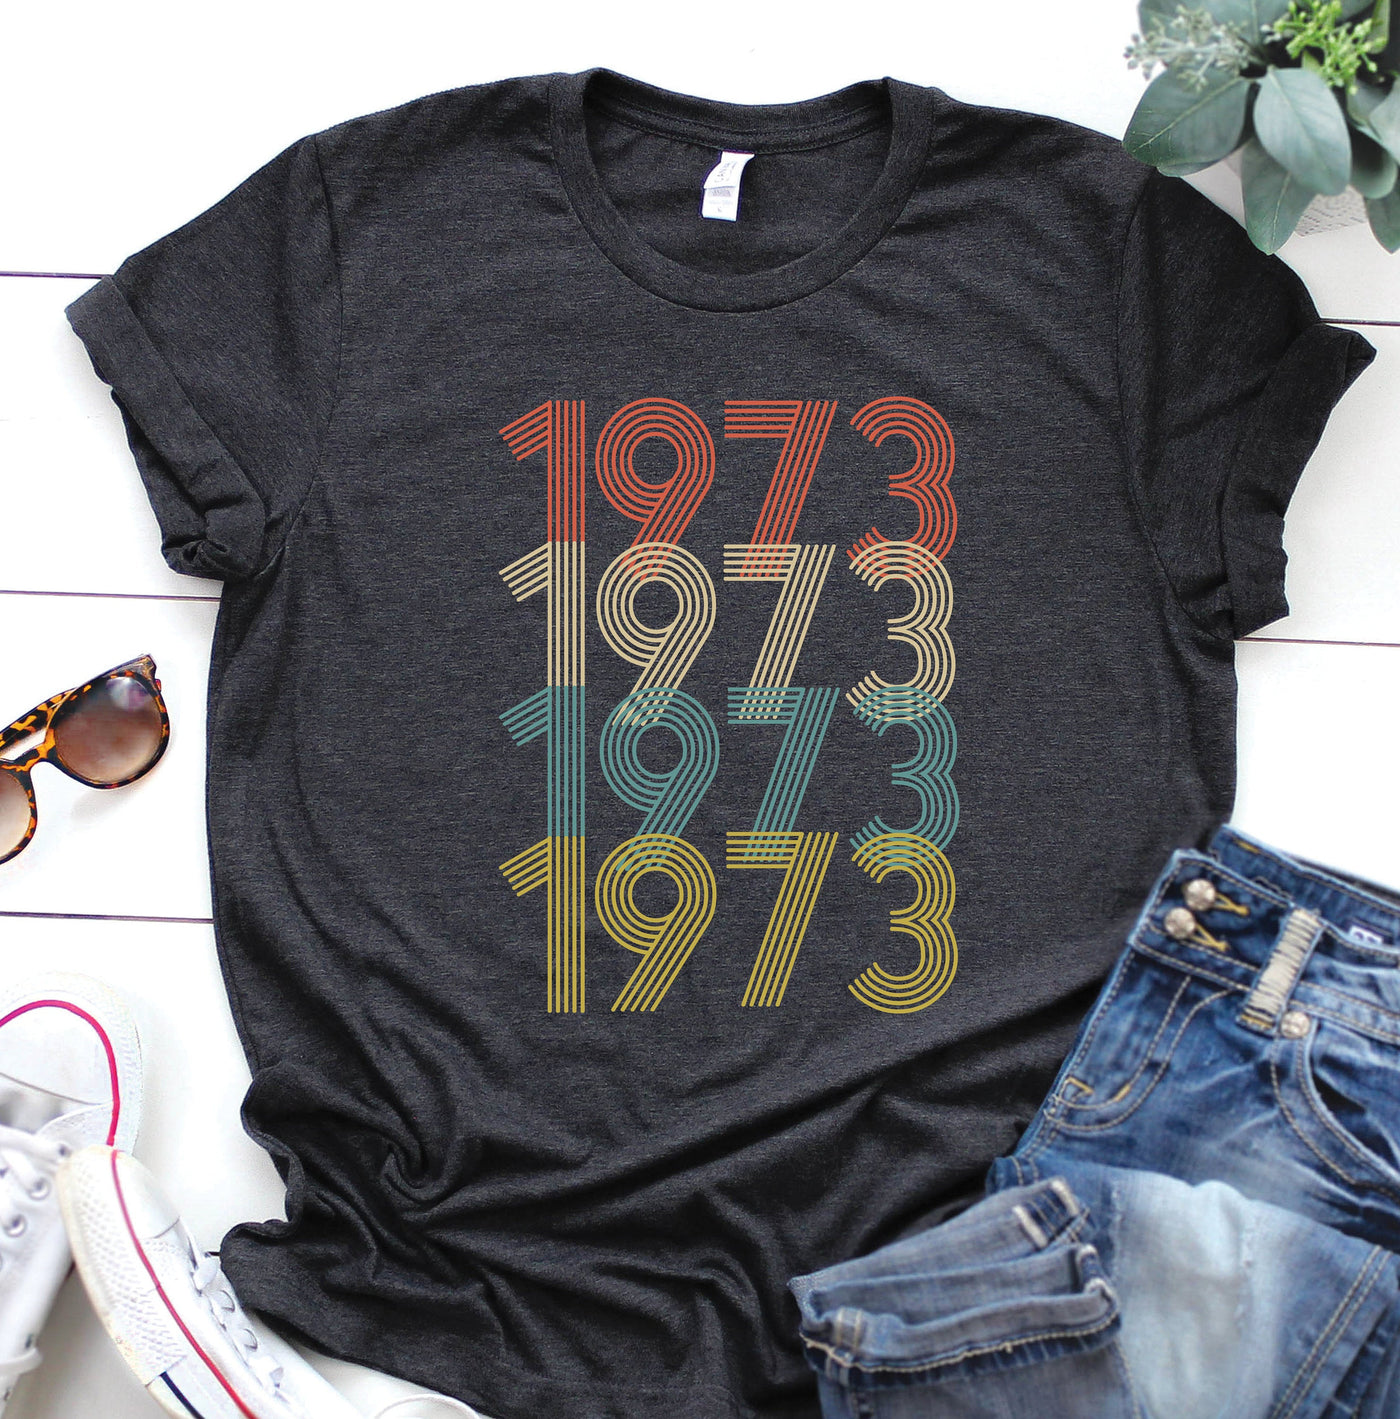 Vintage 1973 Shirt, 50th Birthday, gift for her